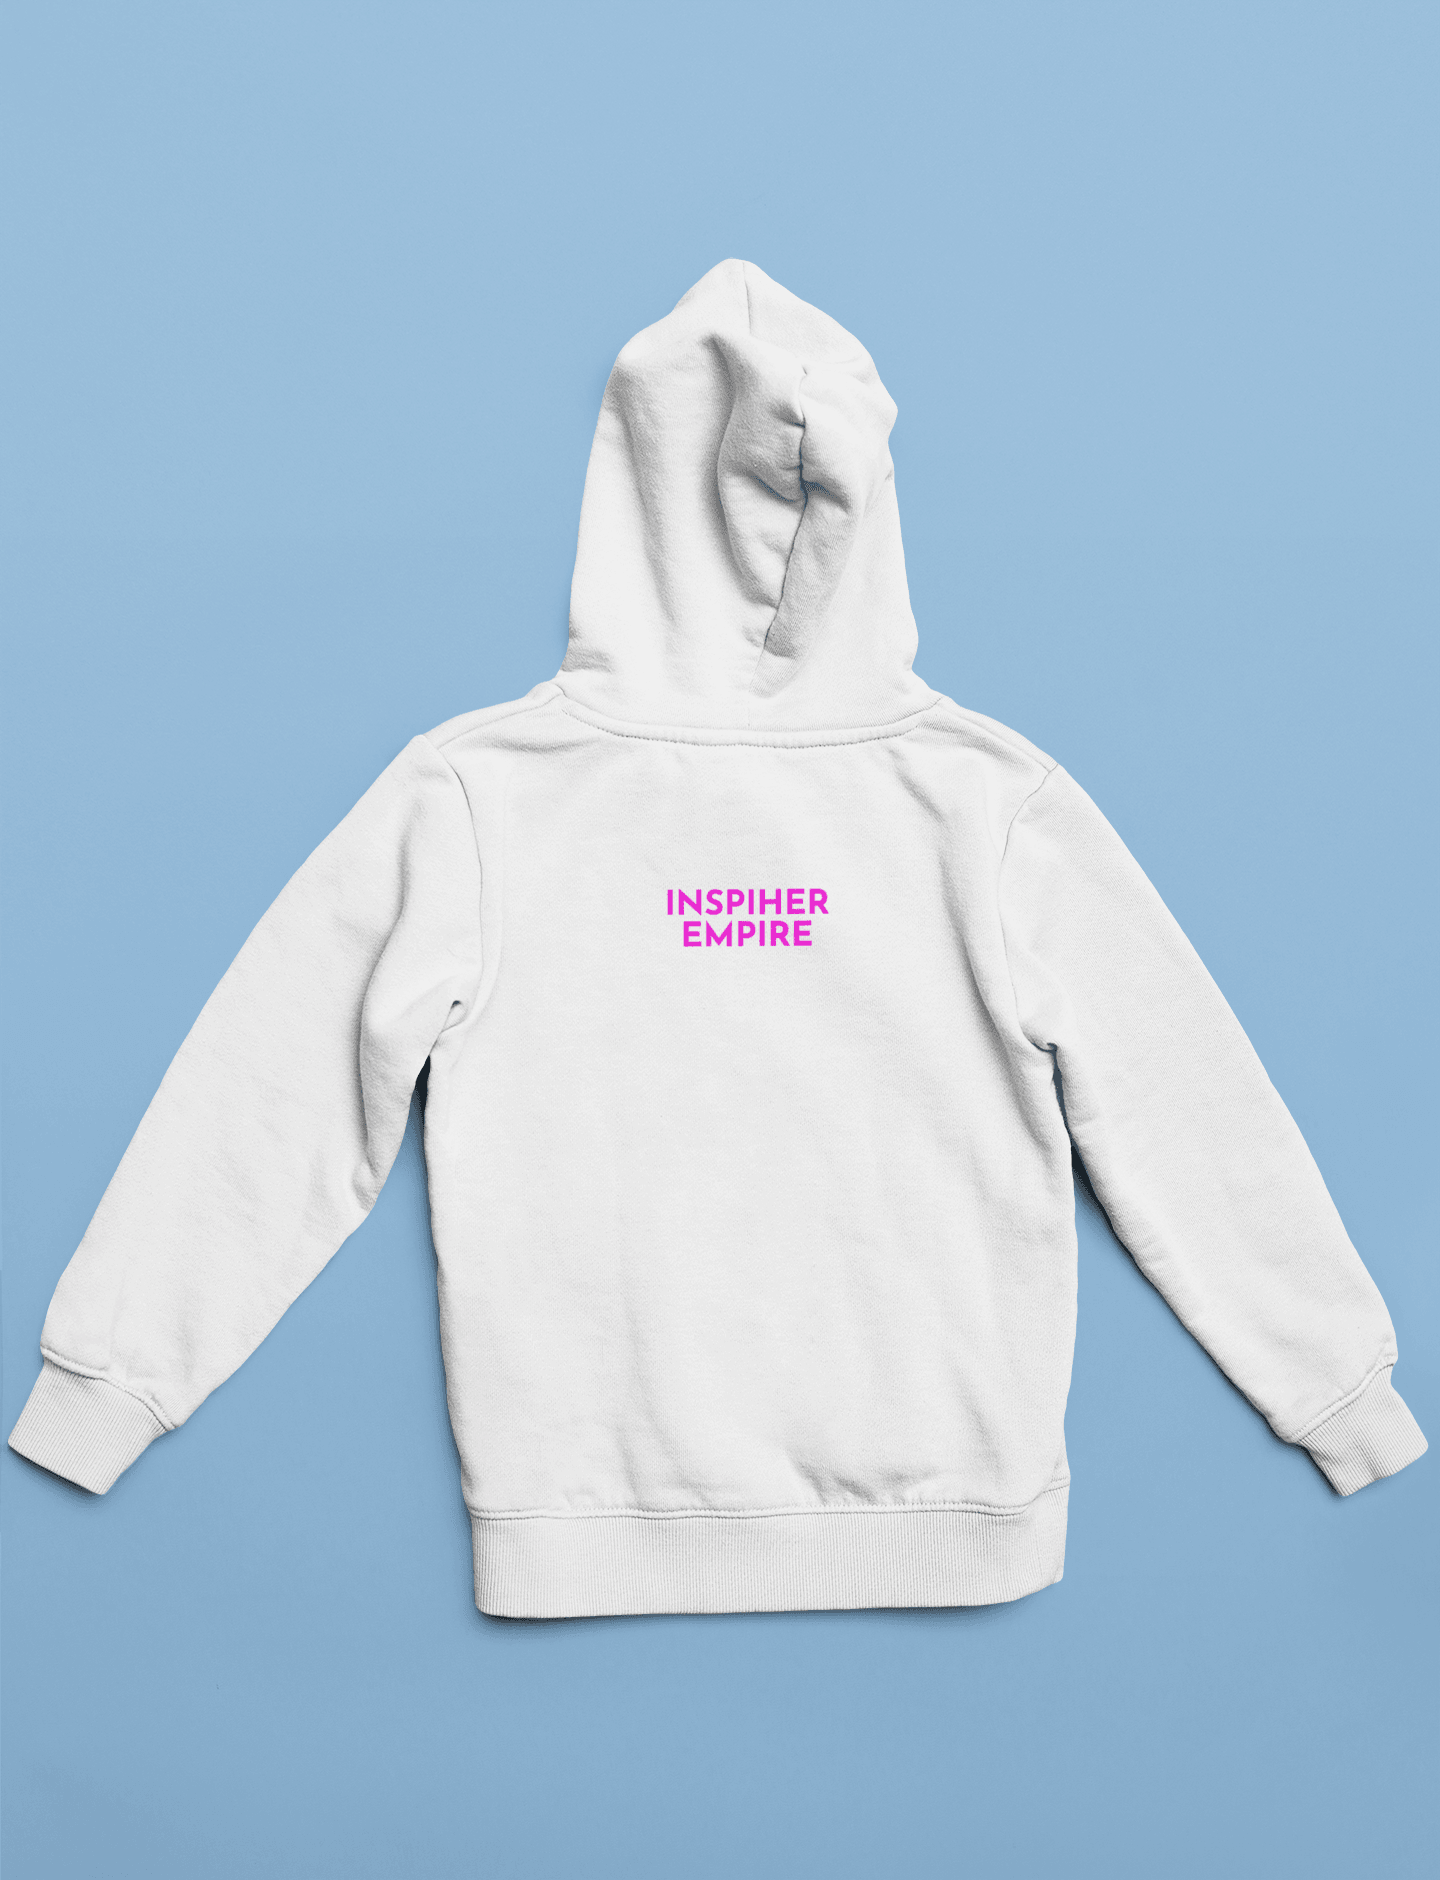 No Competition Hoodie